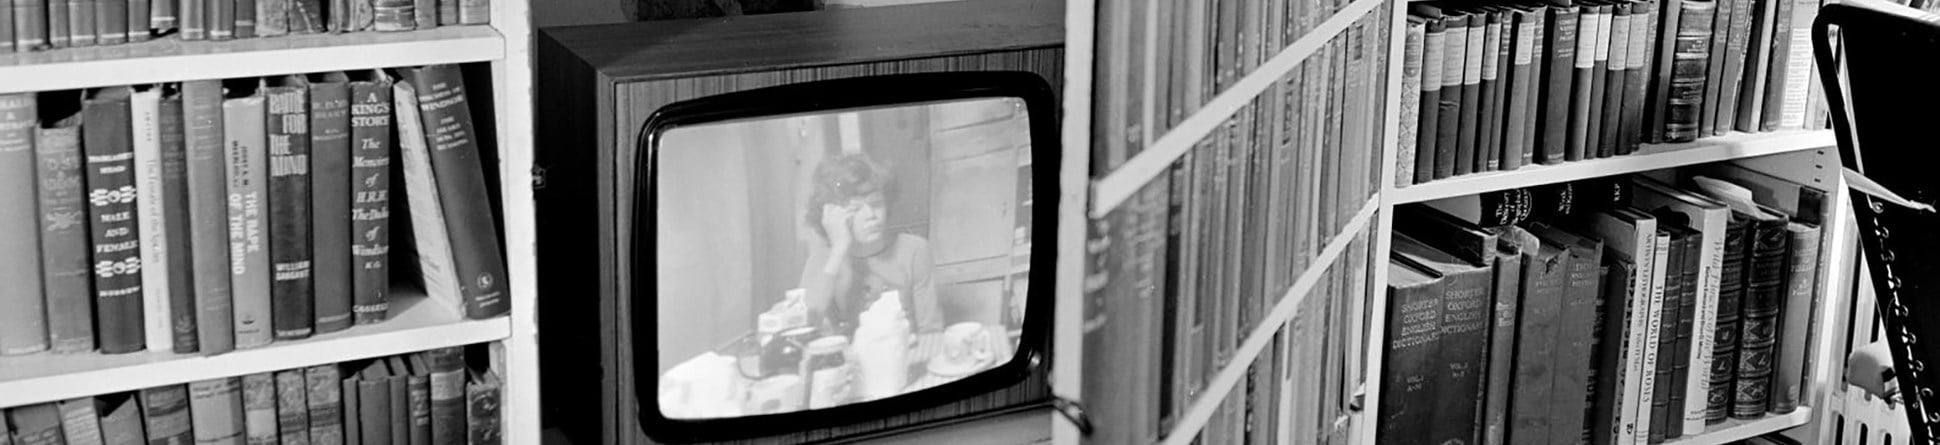 Black and white photo of a television in a bookcase